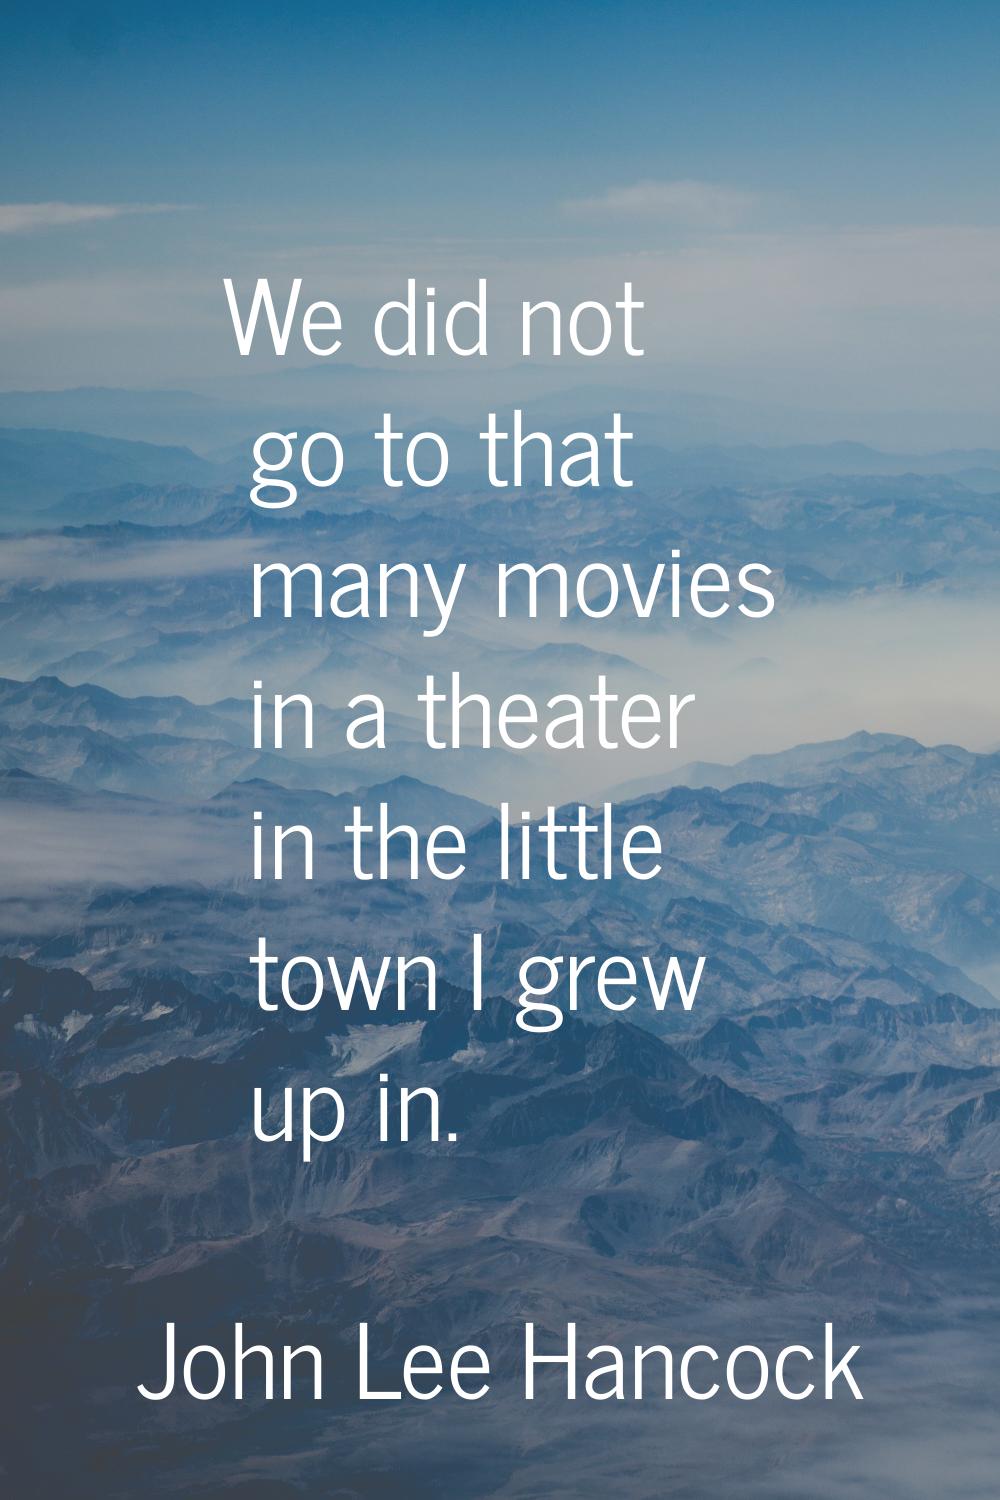 We did not go to that many movies in a theater in the little town I grew up in.